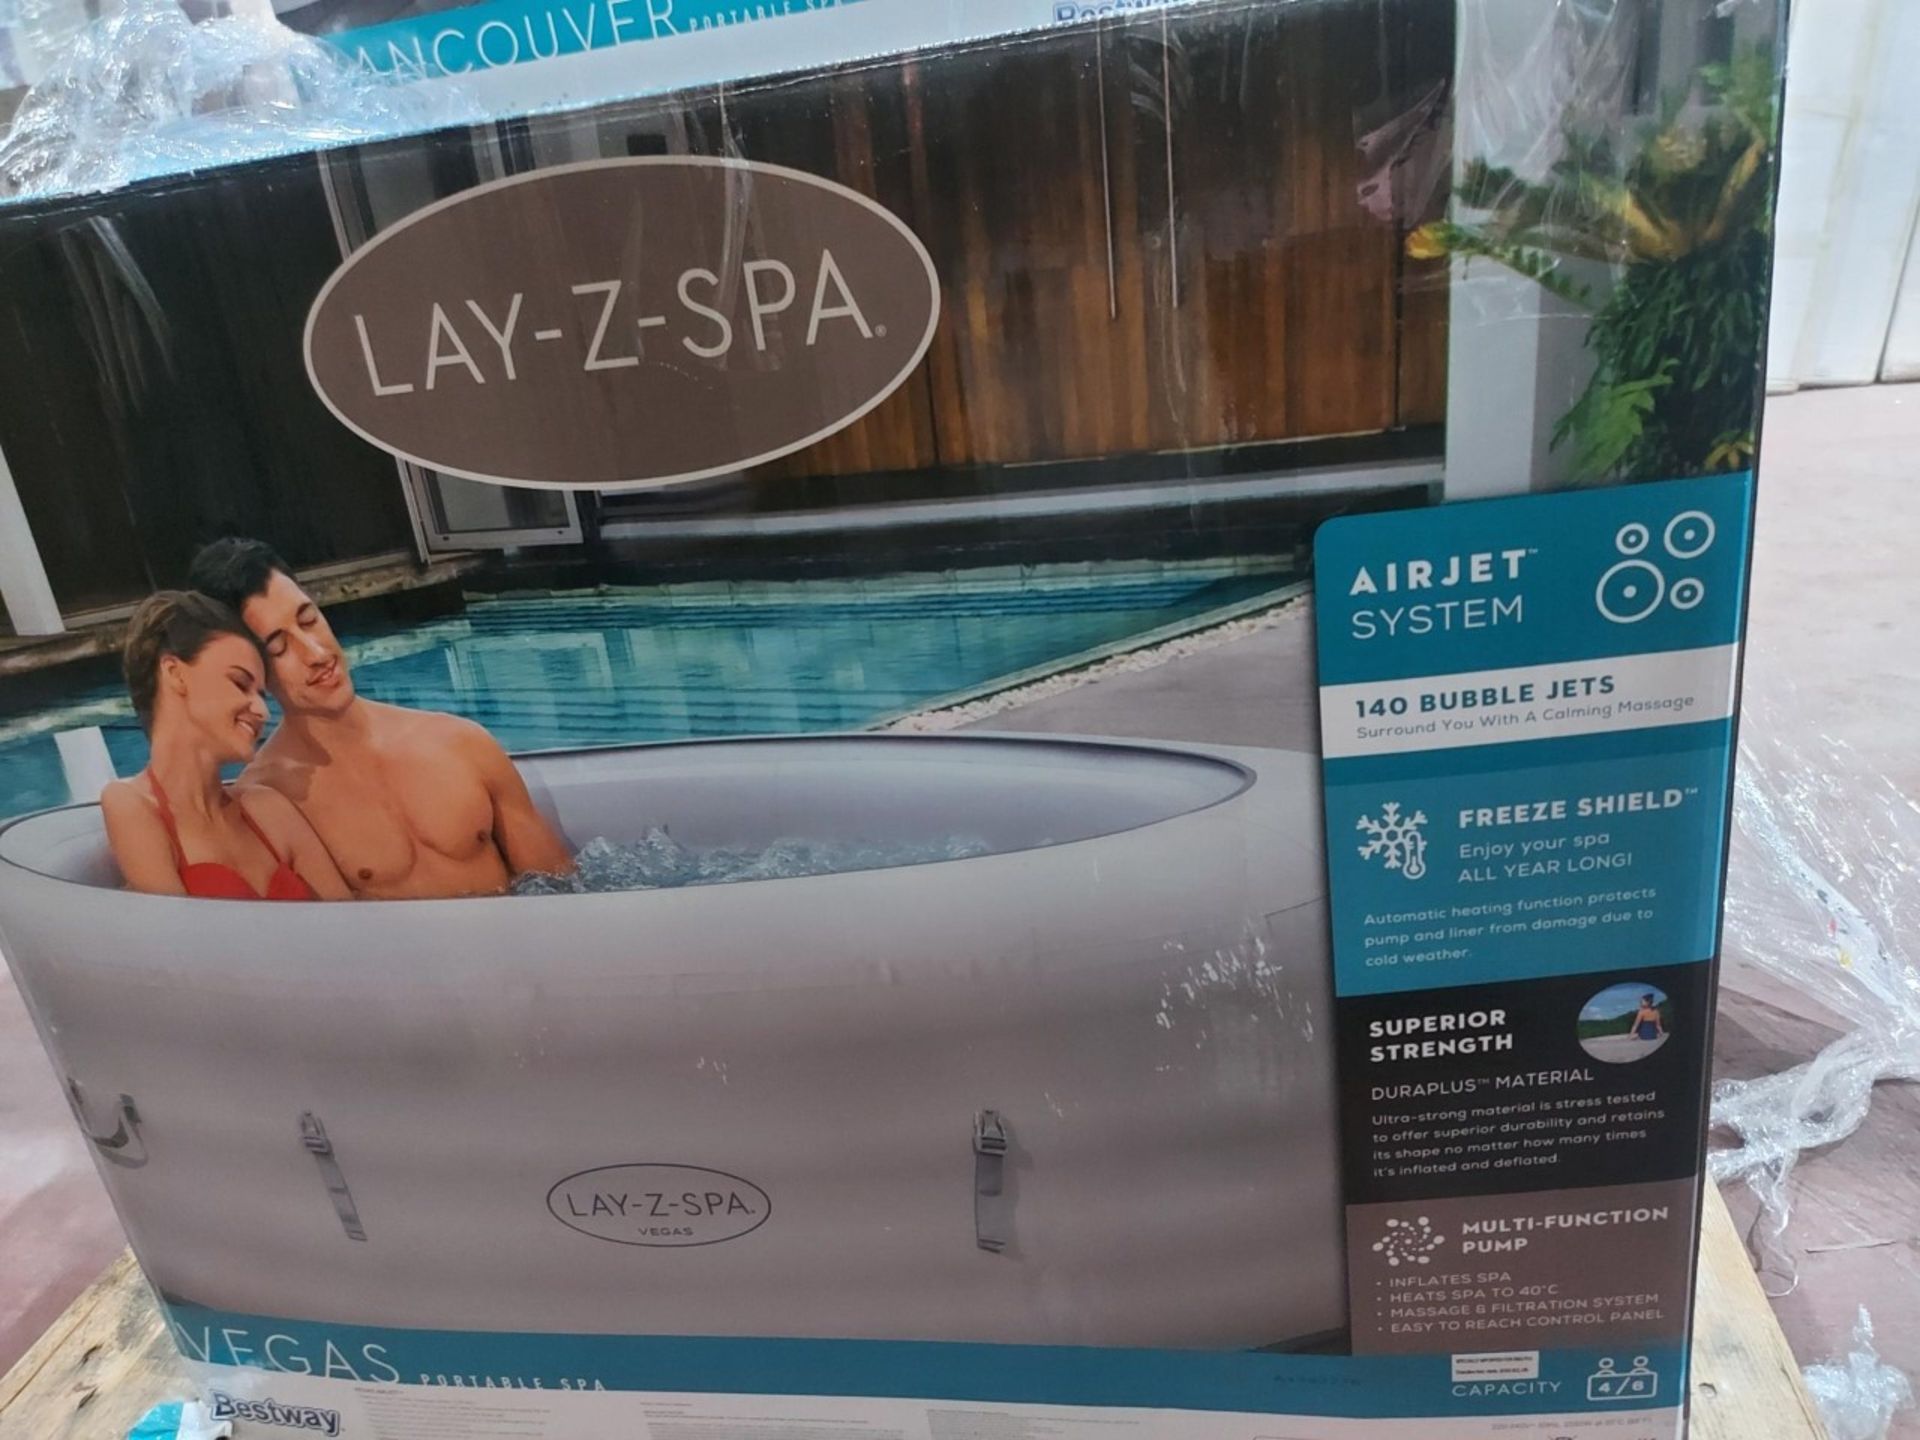 BOXED Lay-Z-Spa Vegas Airjet 4-6 Person Hot Tub. RRP £490 UNCHECKED/UNTESTED